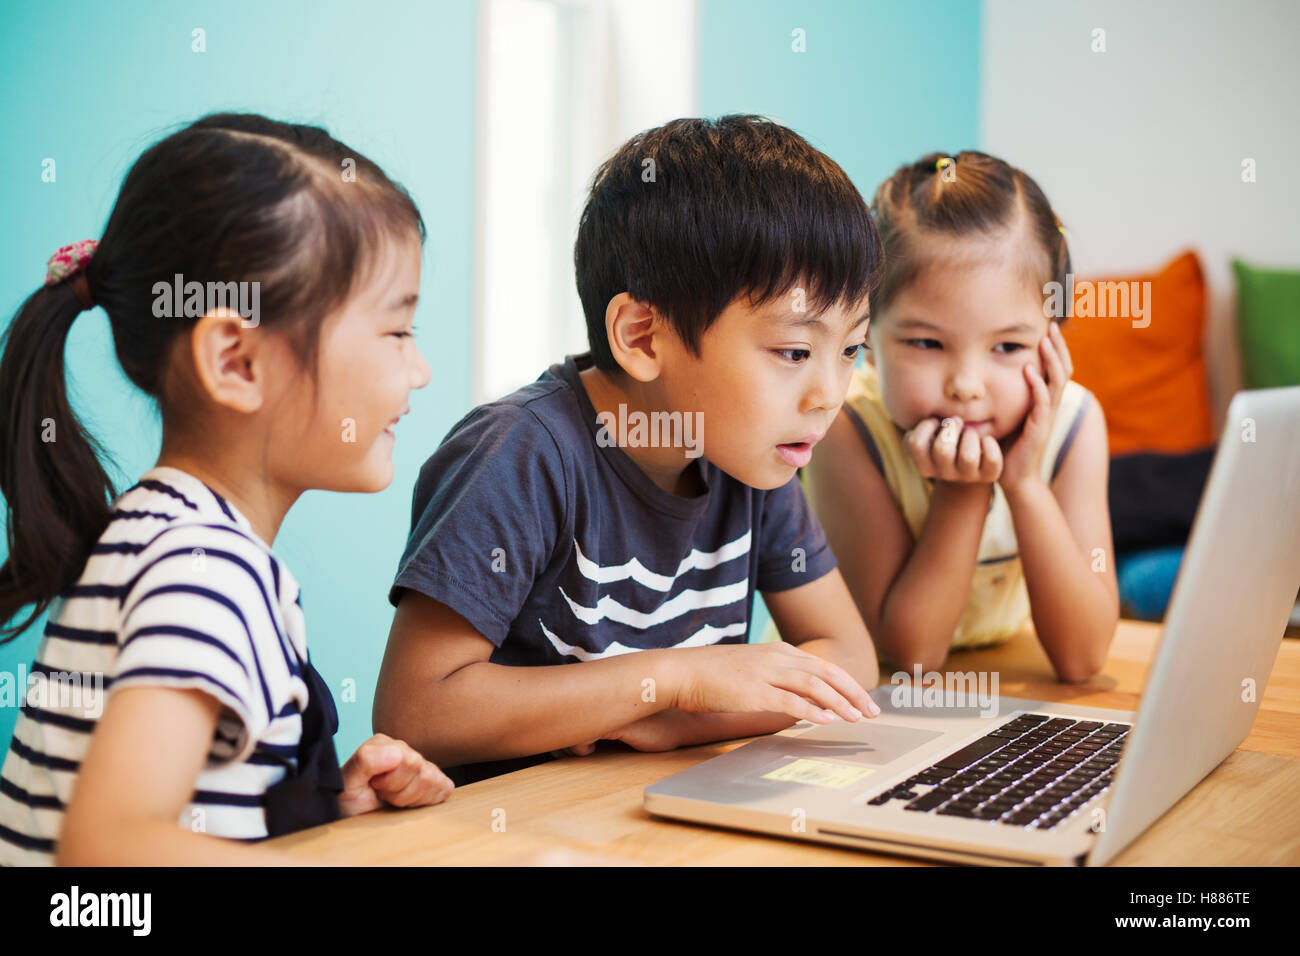 Three children using a laptop, two girls and a boy. Stock Photo